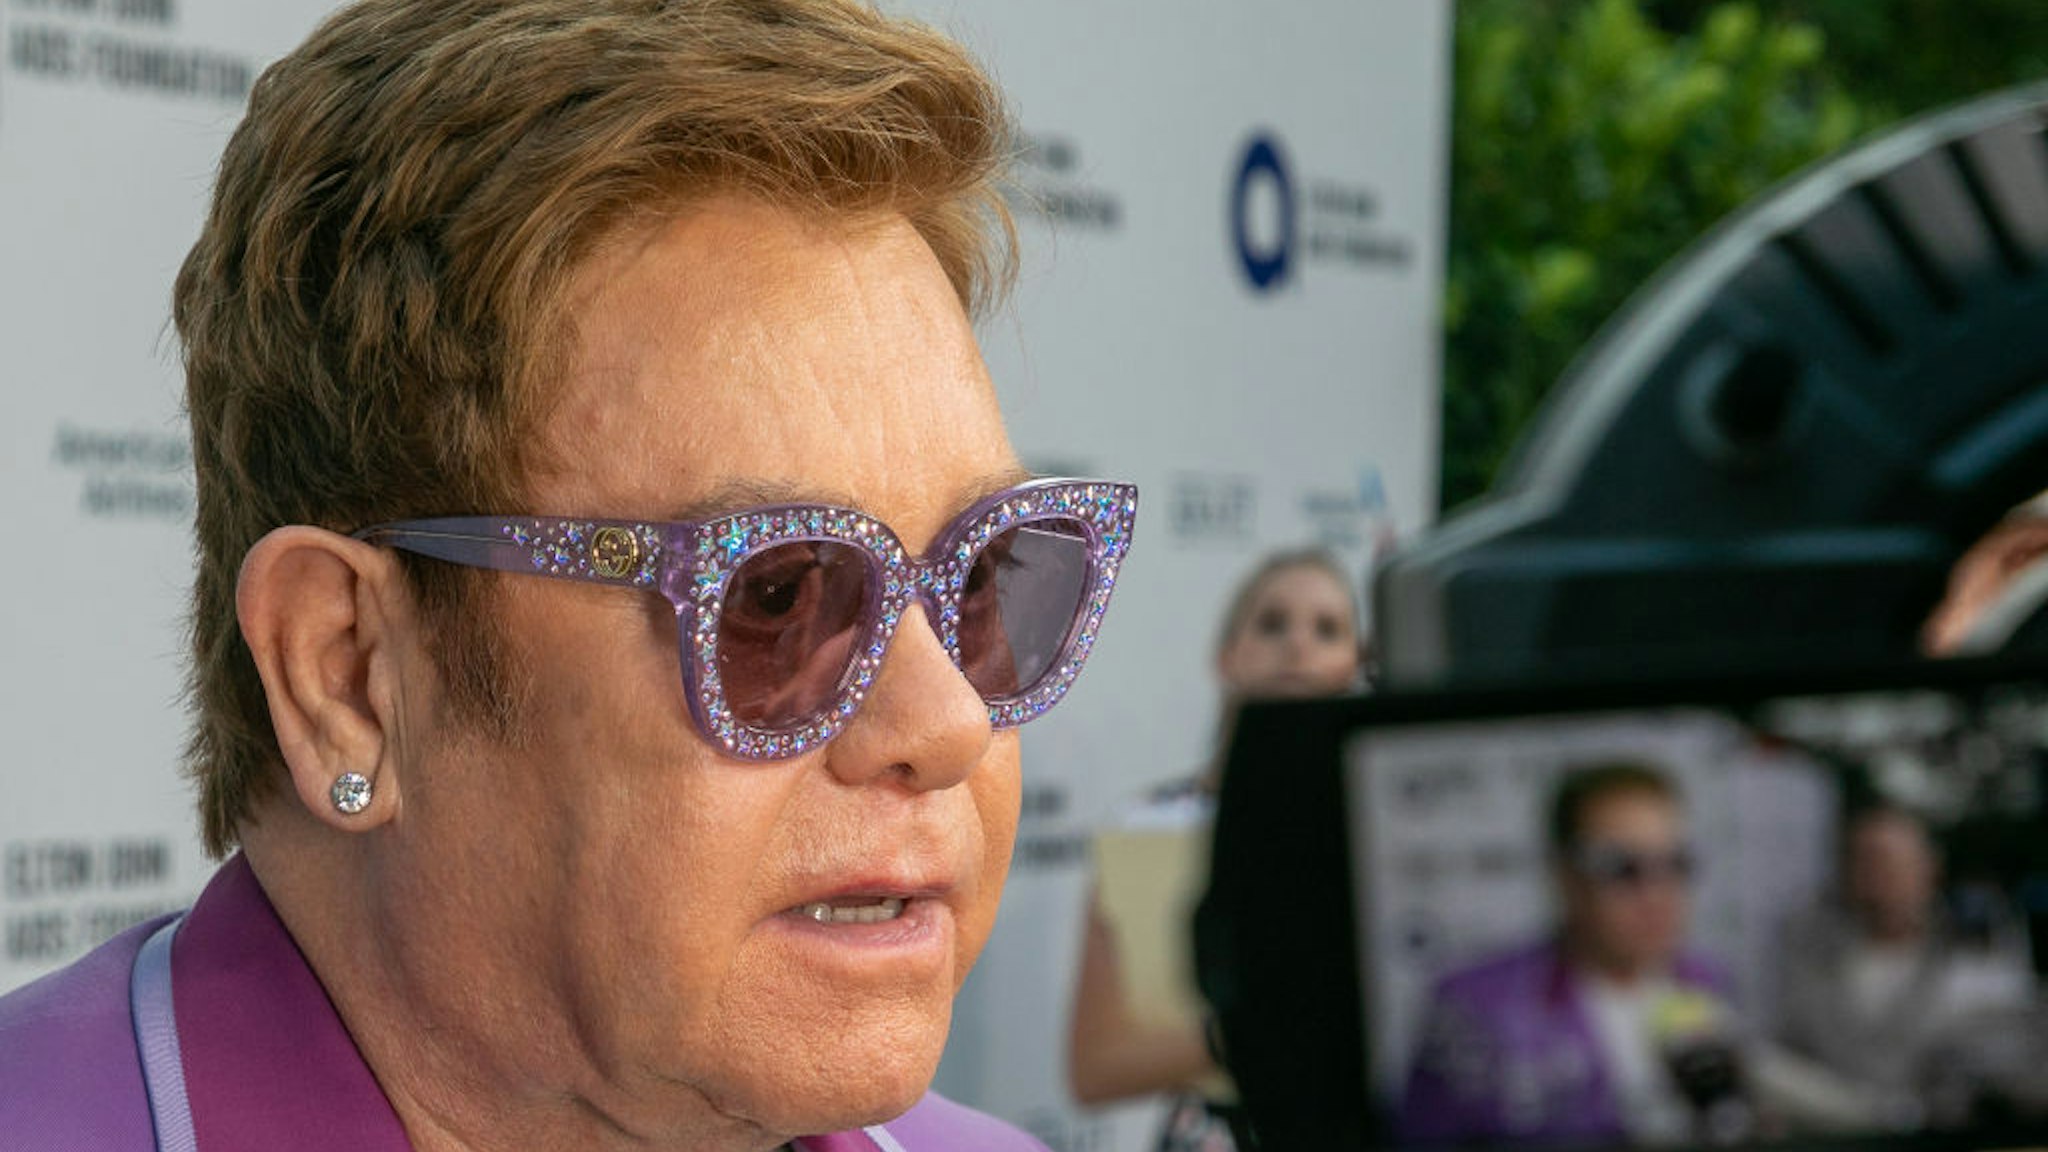 Singer Elton John attends the first “Midsummer Party” hosted by Elton John and David Furnish to raise funds for the Elton John Aids Foundation on July 24, 2019 in Antibes, France.